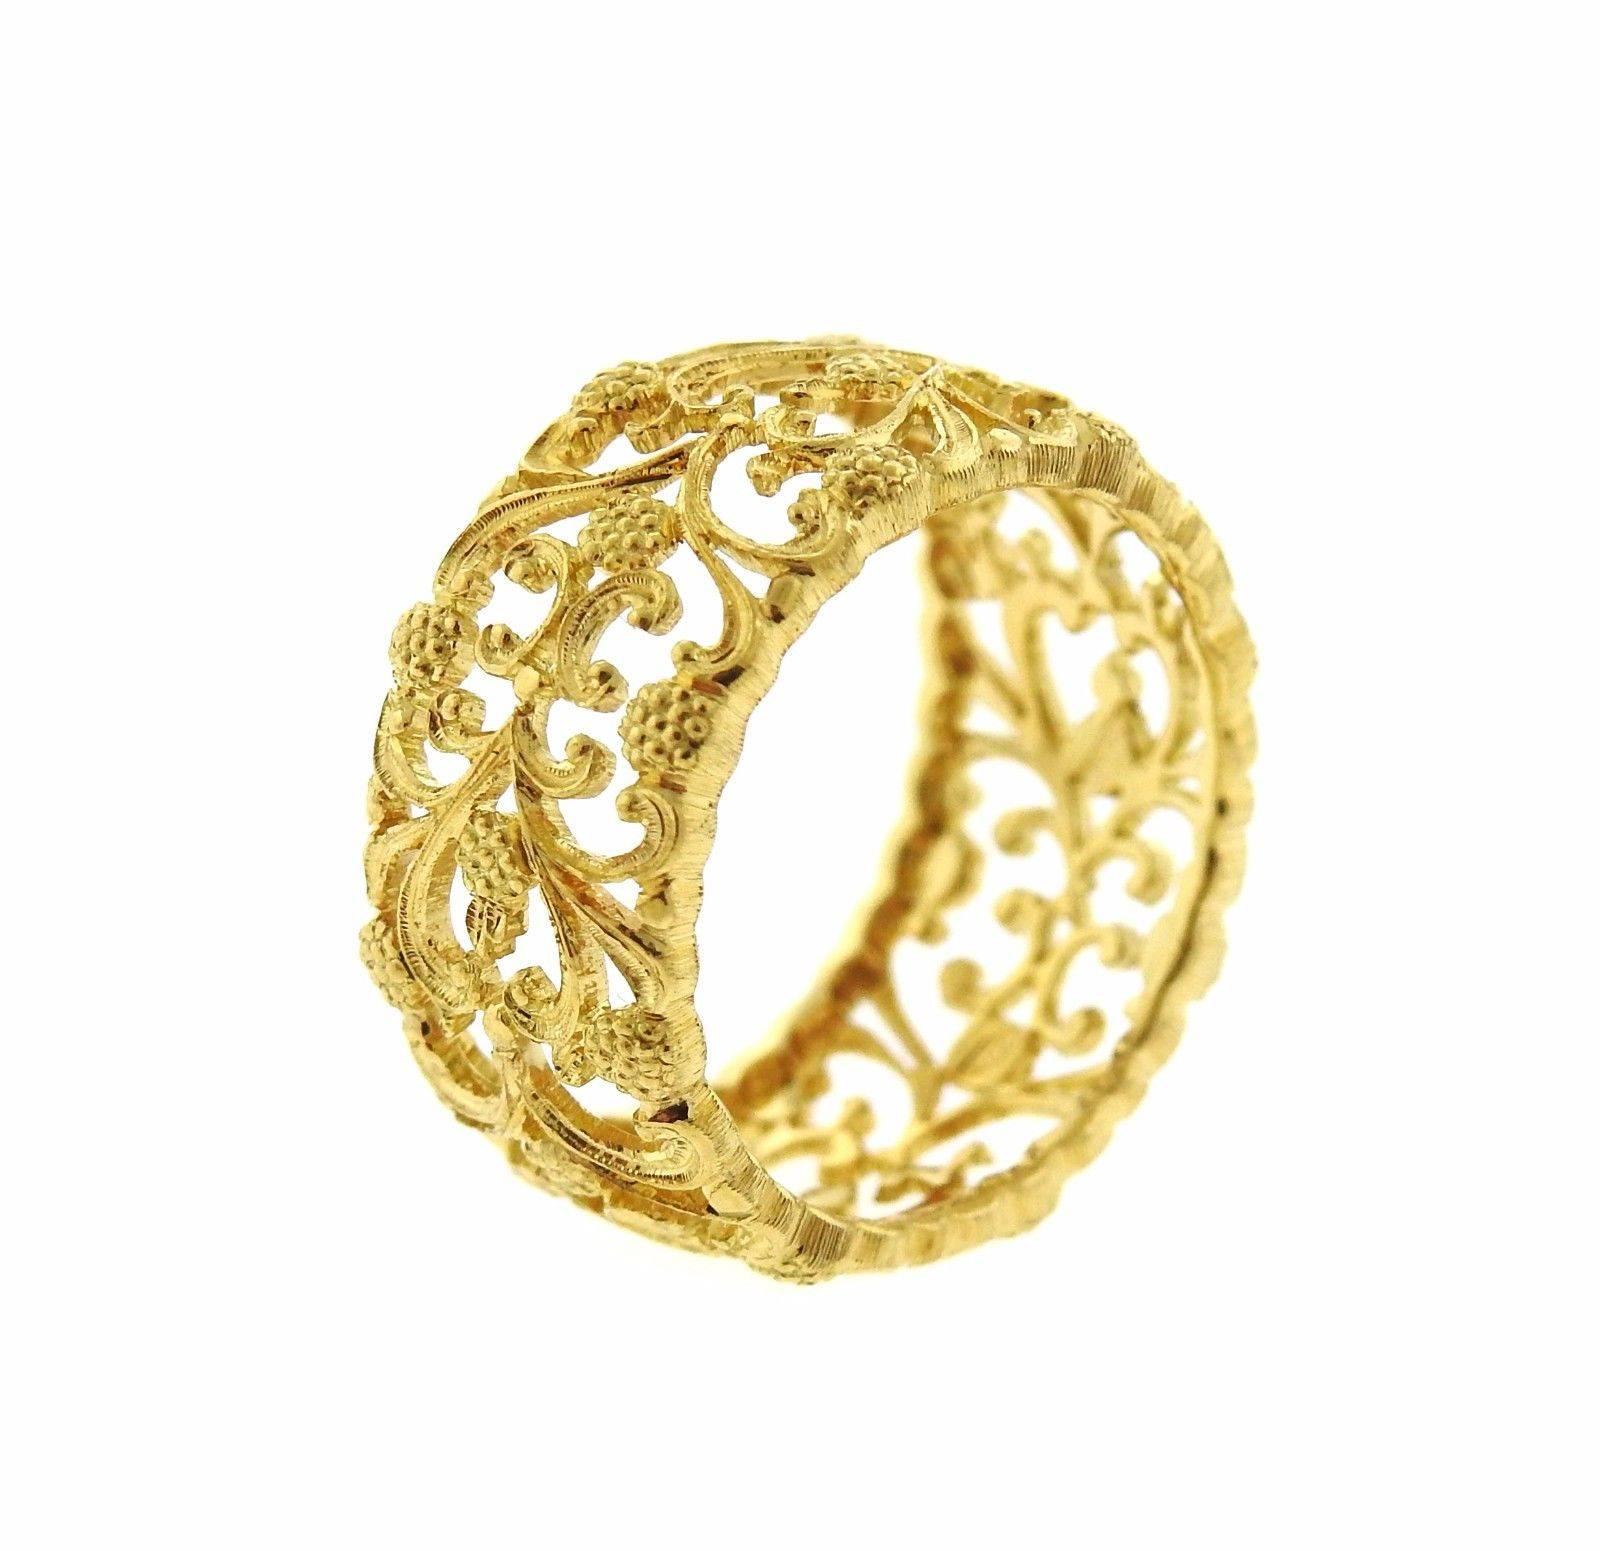 An 18k yellow gold open work wedding band ring.  The ring size 6 3/4, ring is 10mm wide.  The weight of the piece is 4.8 grams.  Marked:  Buccellati, Italy, 18k.  Retail is $7570. Comes with Buccellati paperwork. 
